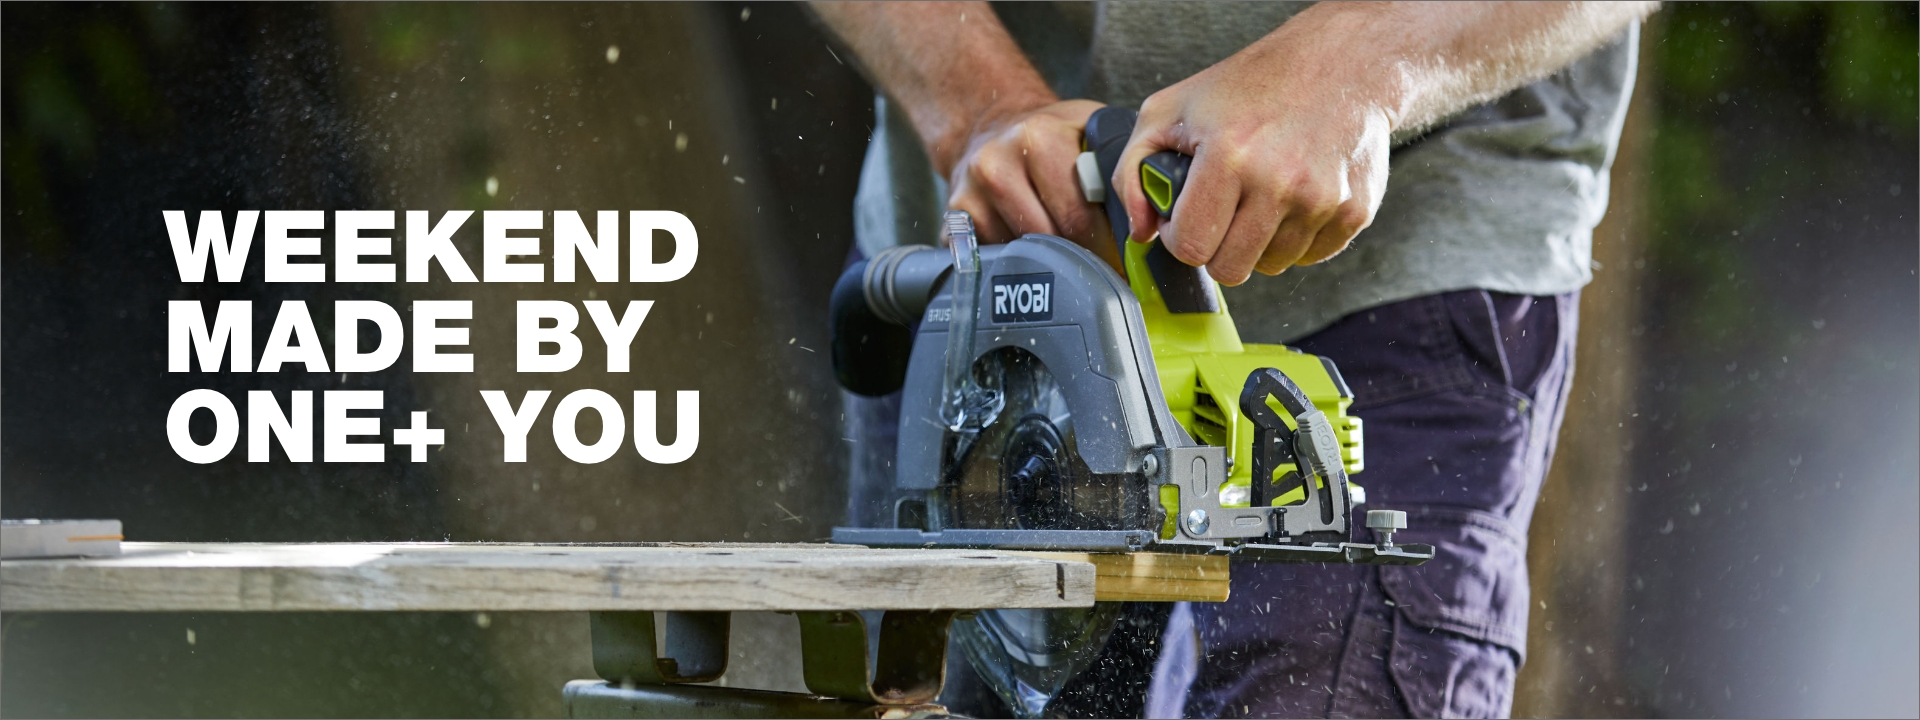 DIY projects to tackle over the long weekend – RYOBI TOOLS